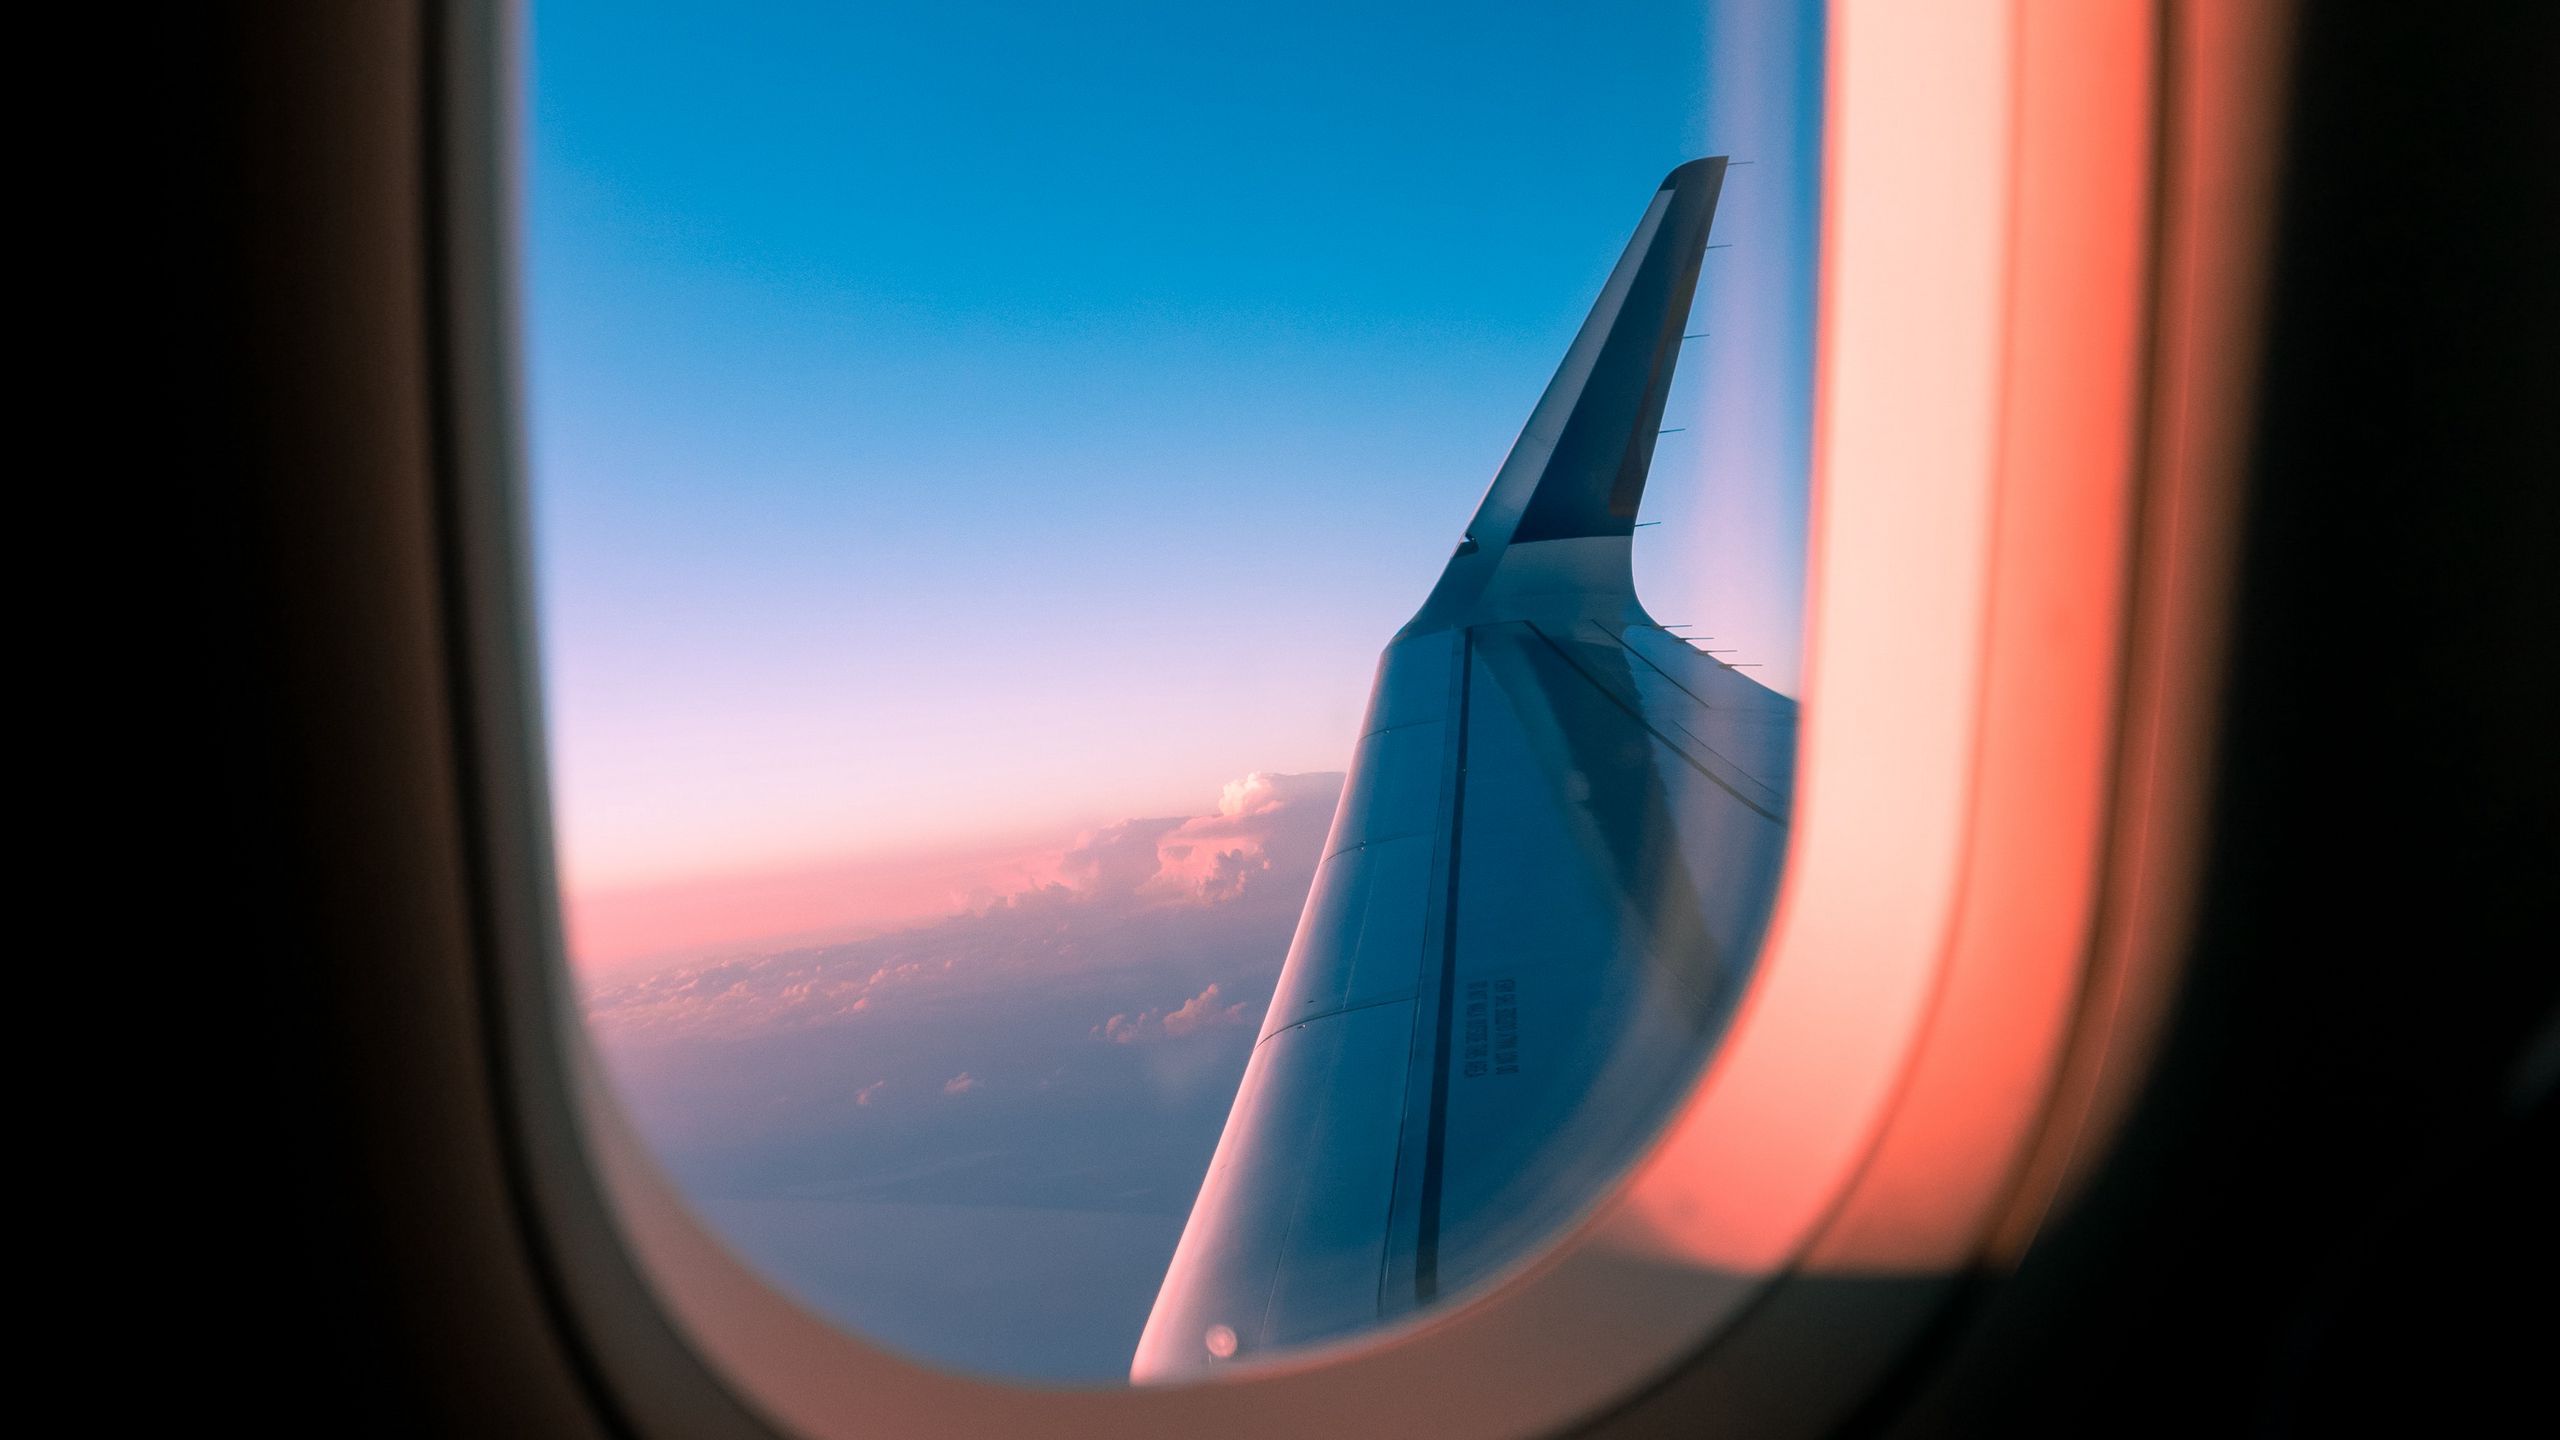 Download wallpaper 2560x1440 airplane, window, porthole, wing, view widescreen 16:9 HD background